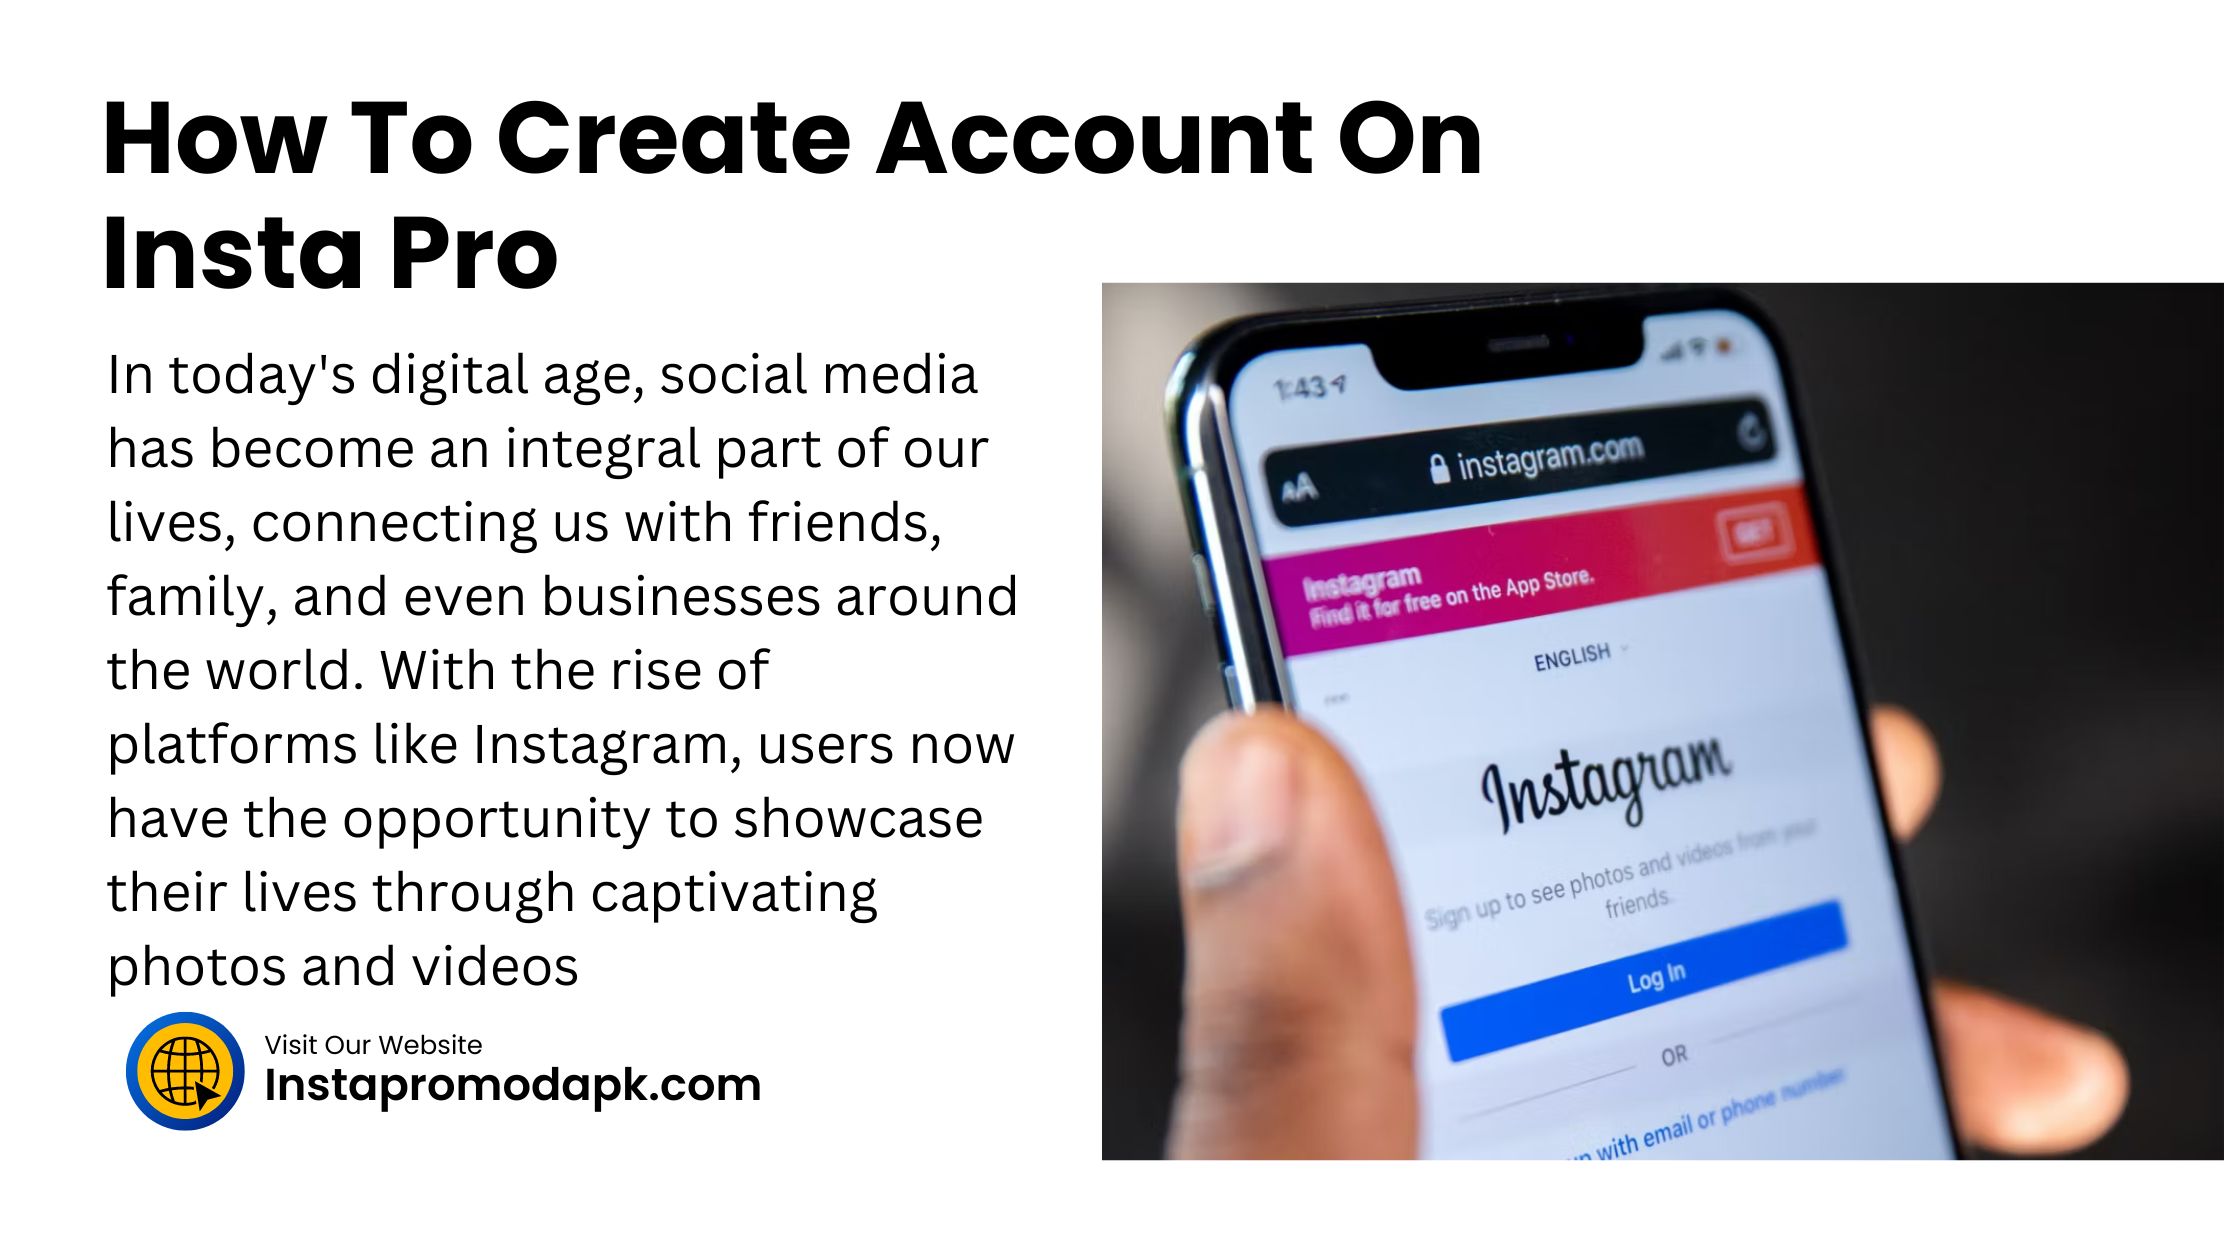 How To Create Account On Insta Pro